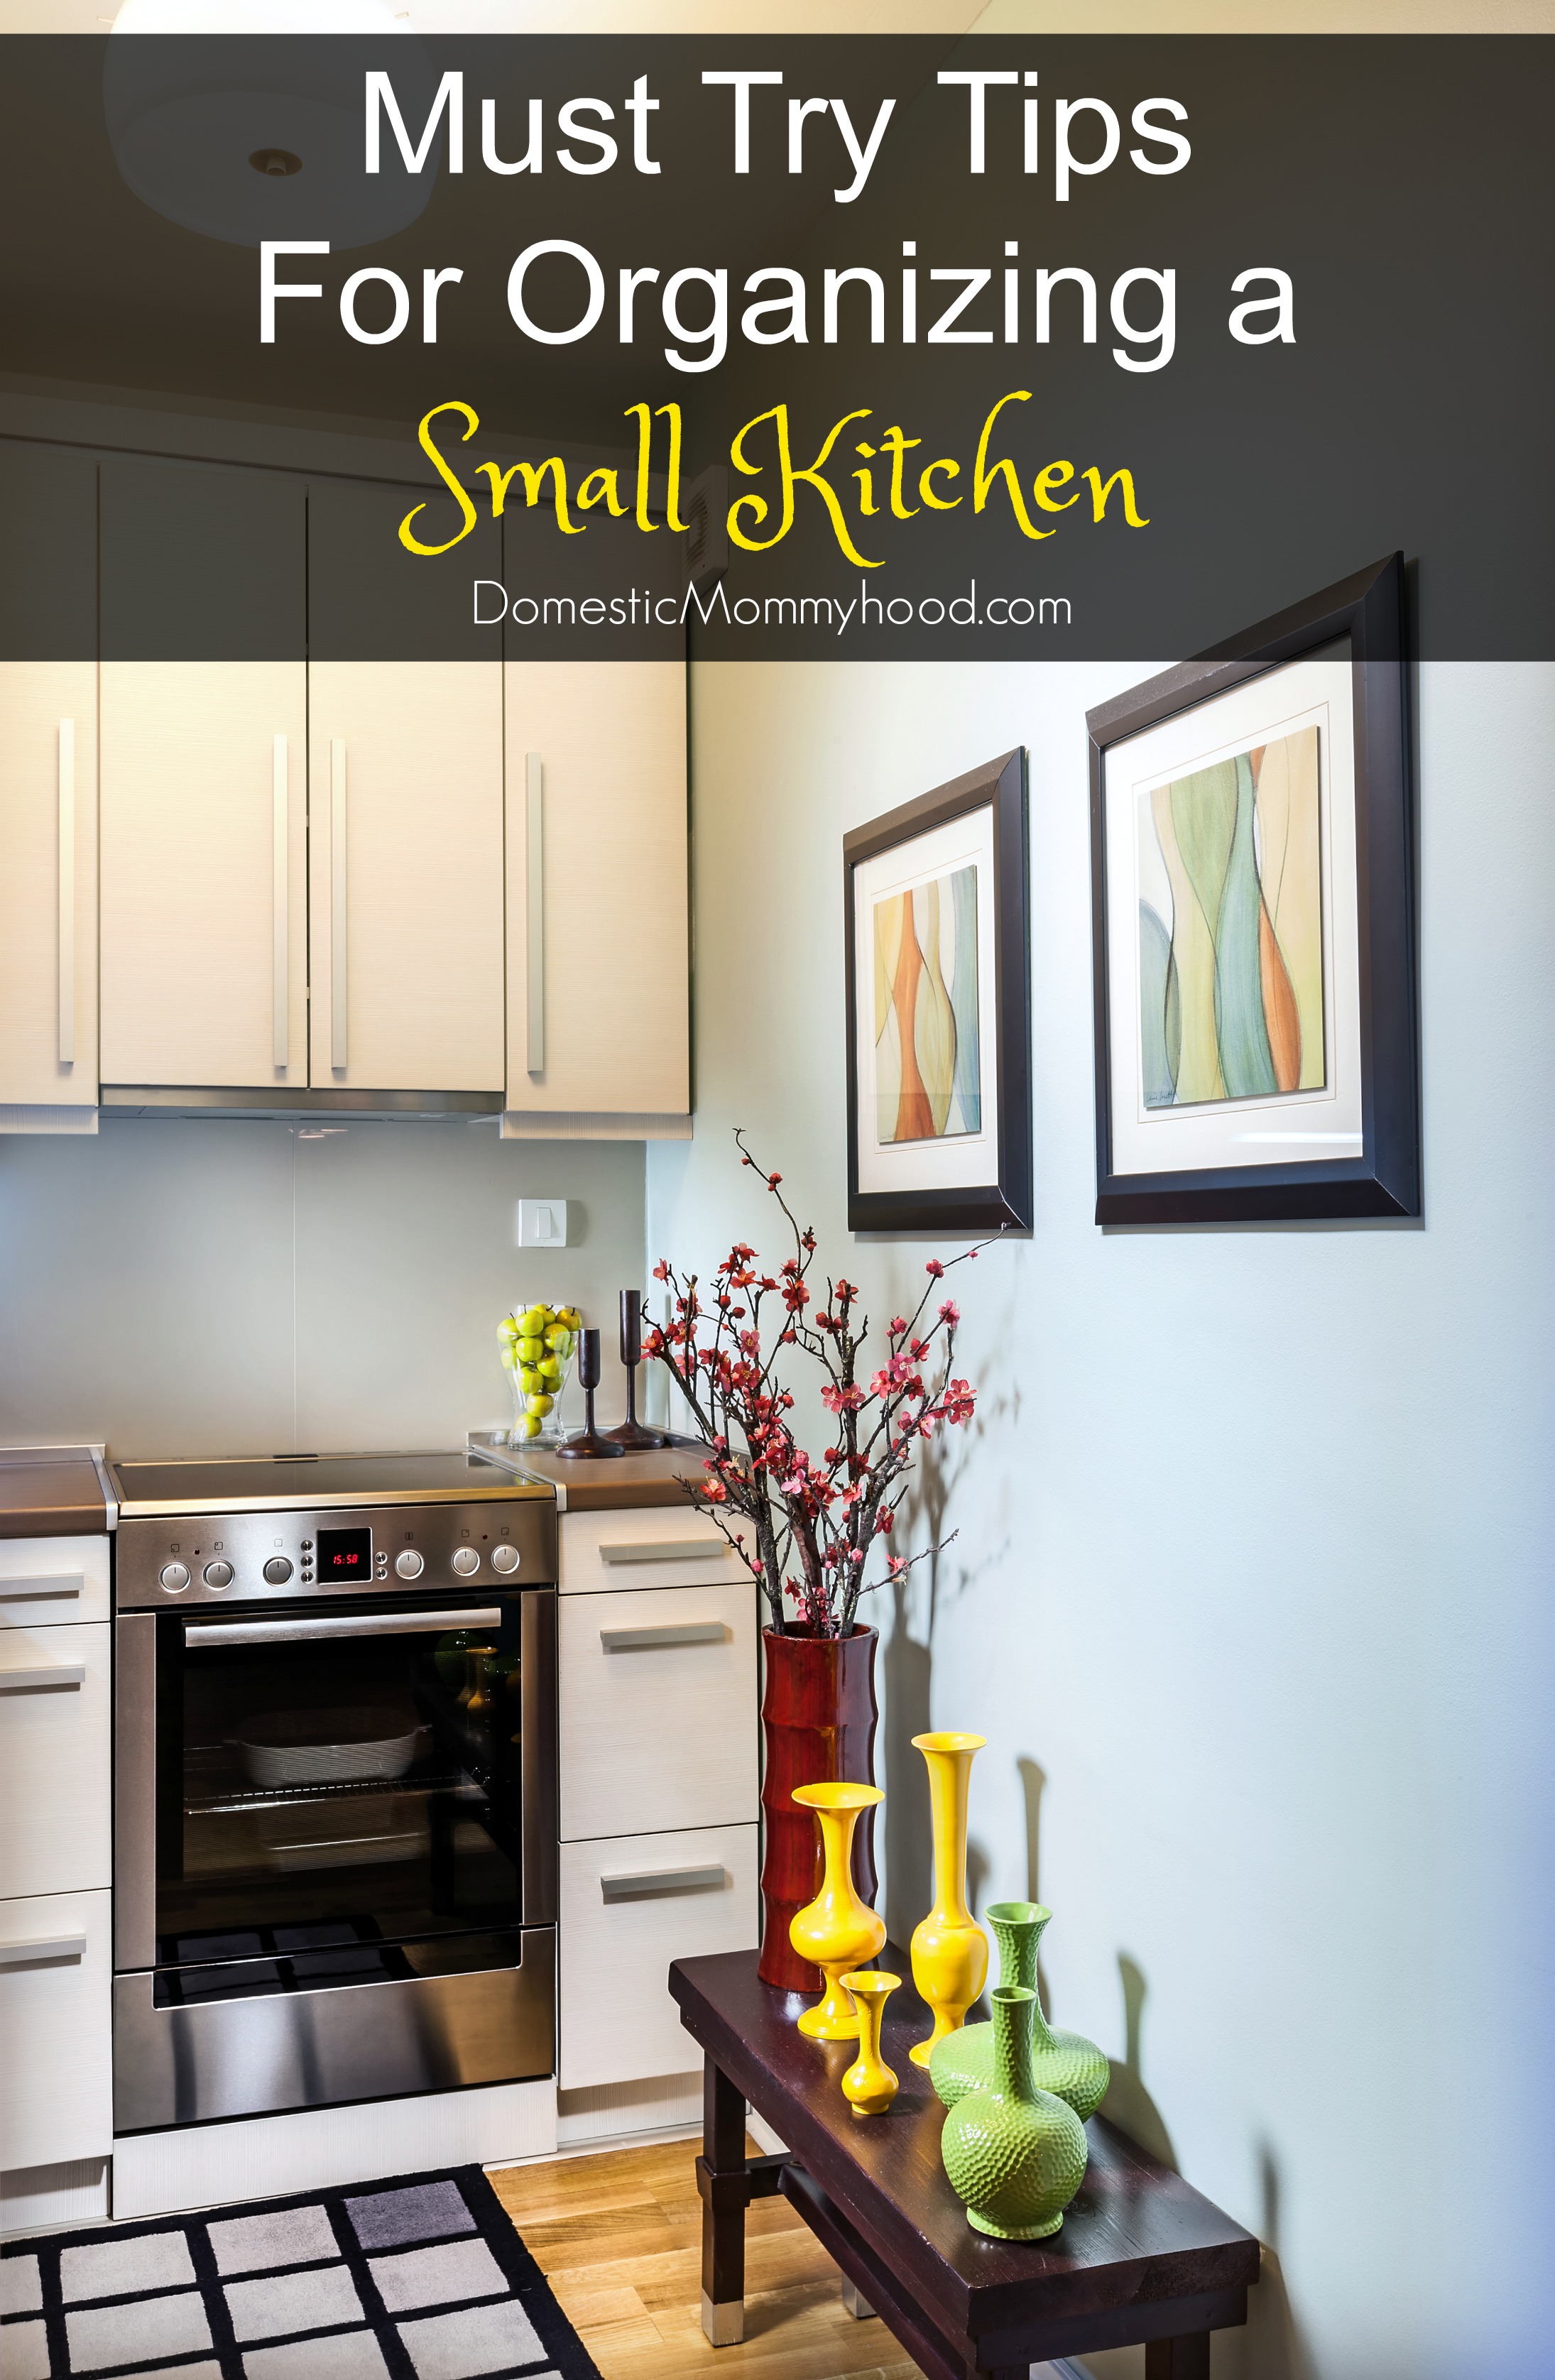 Tips for Organizing a Small Kitchen